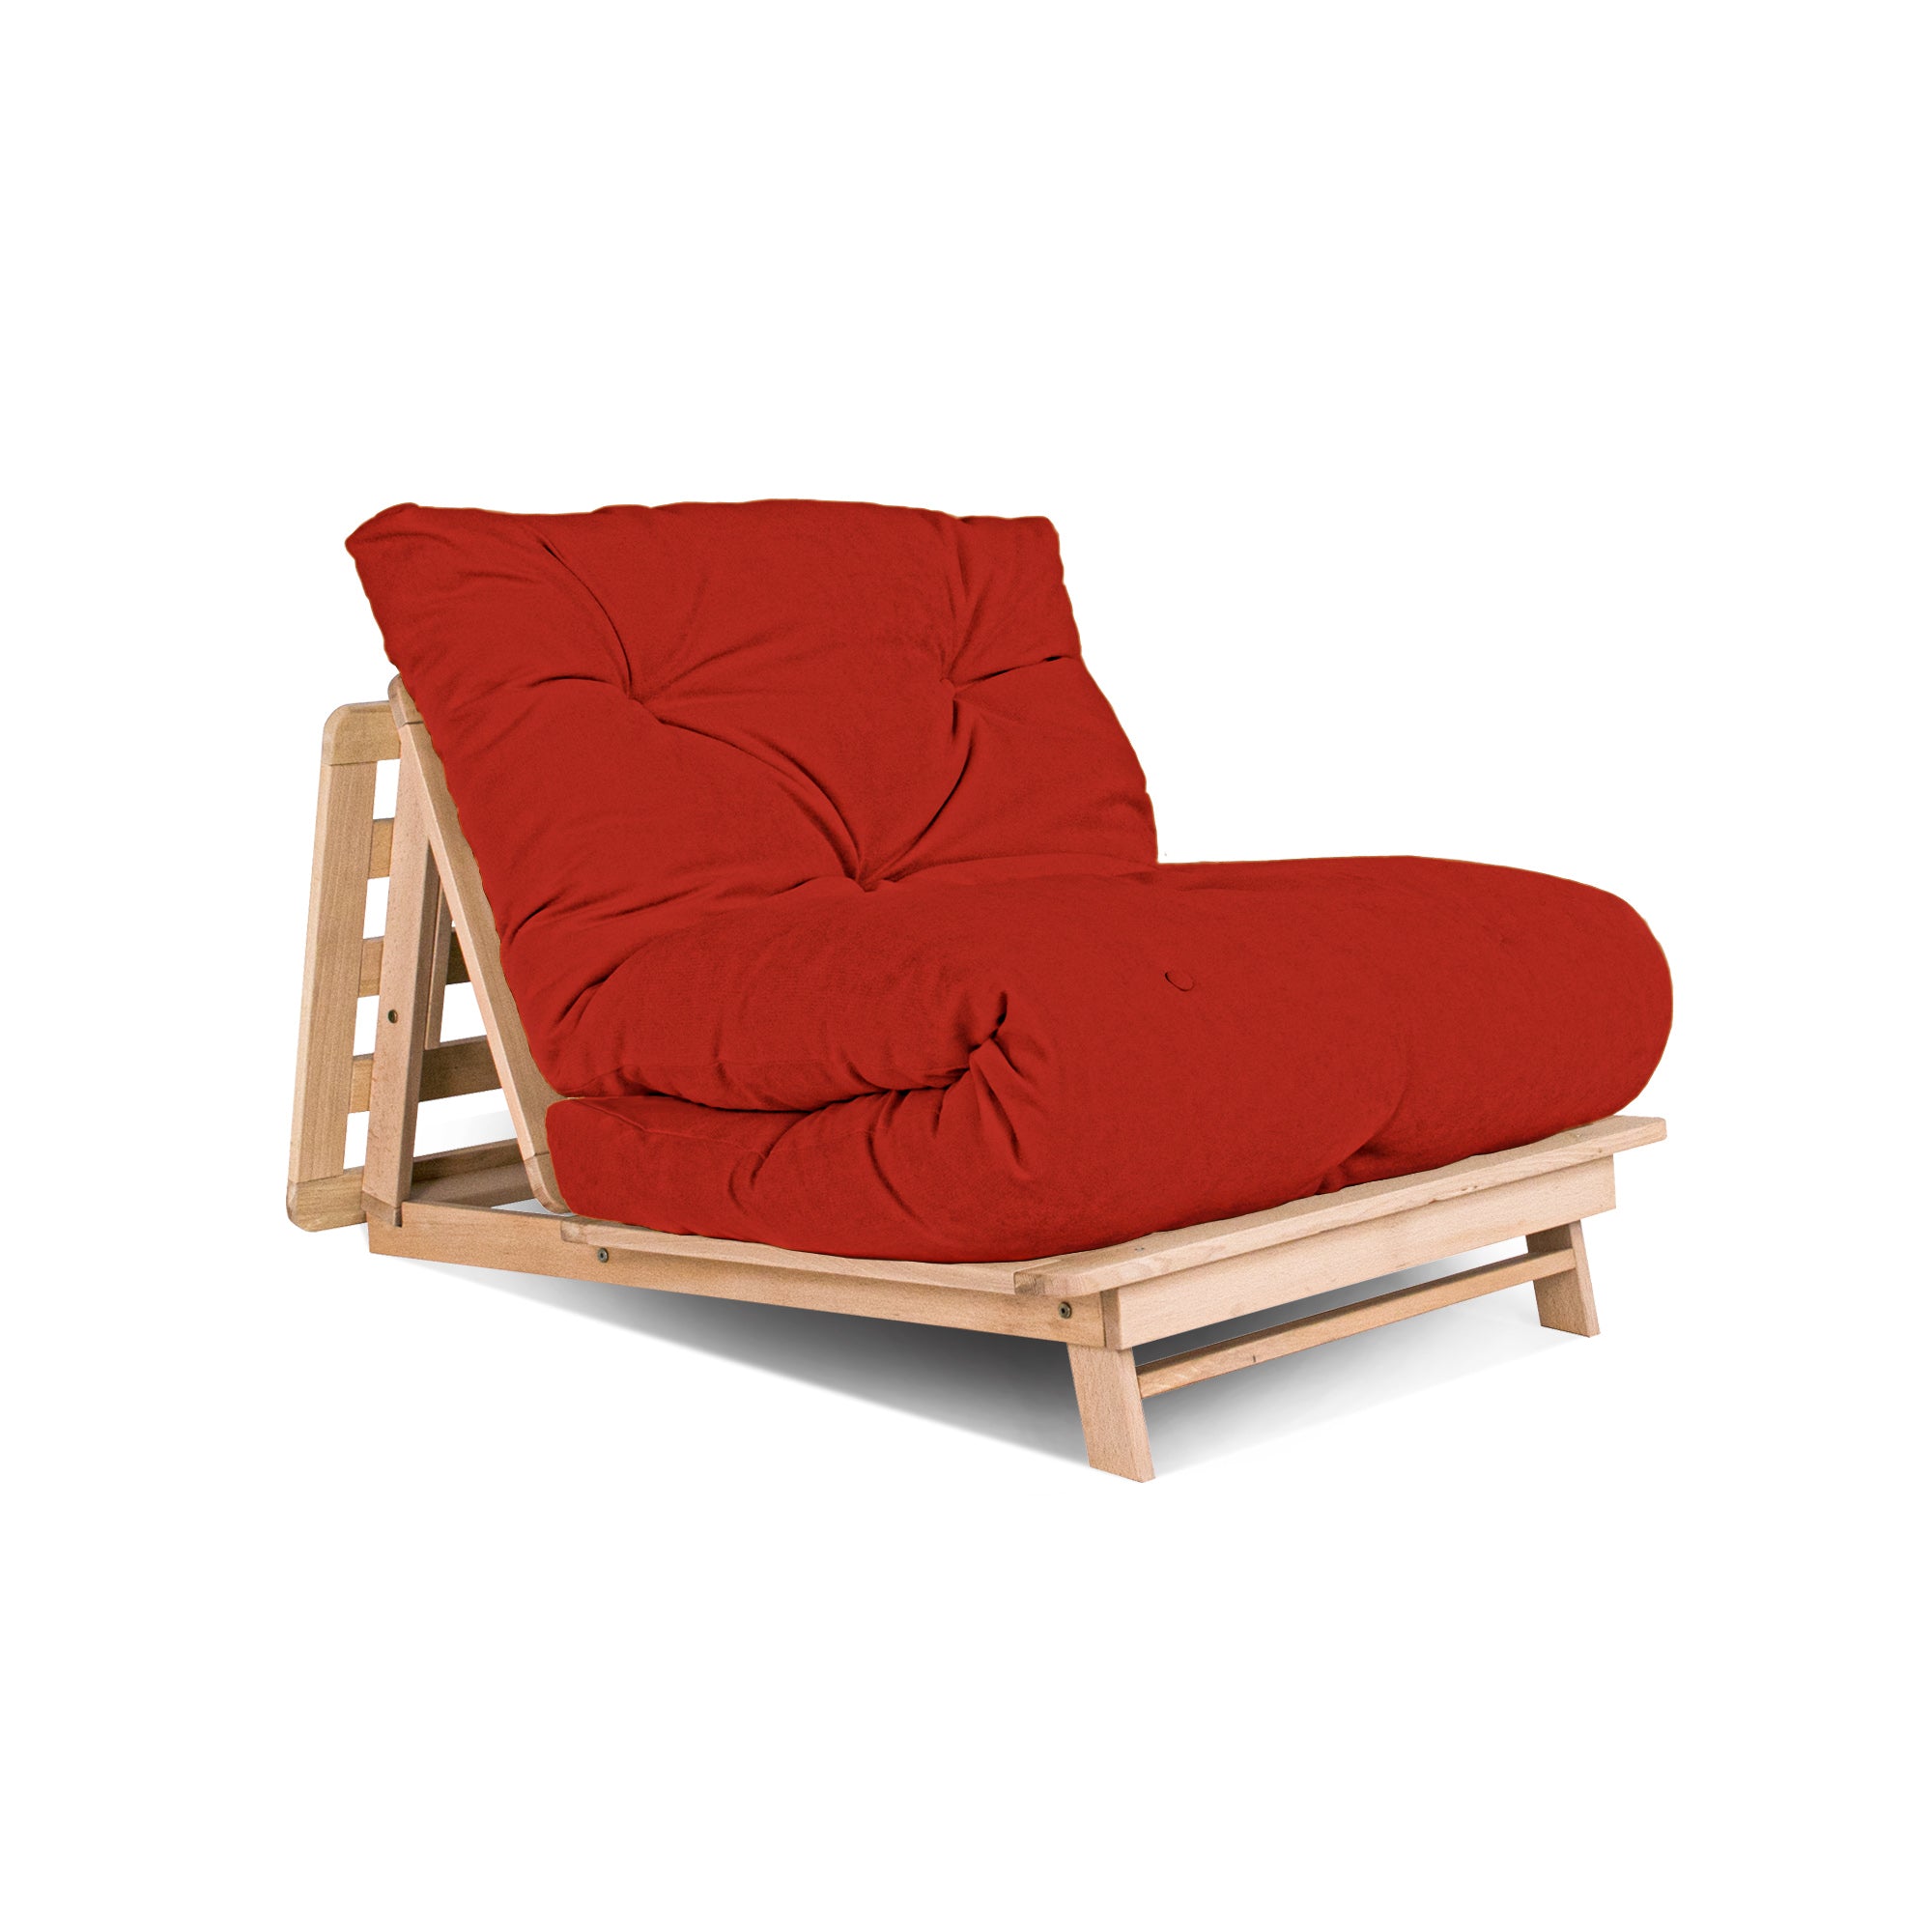 LAYTI-90 Futon Chair, Beech Wood Frame, Natural Colour-red fabric